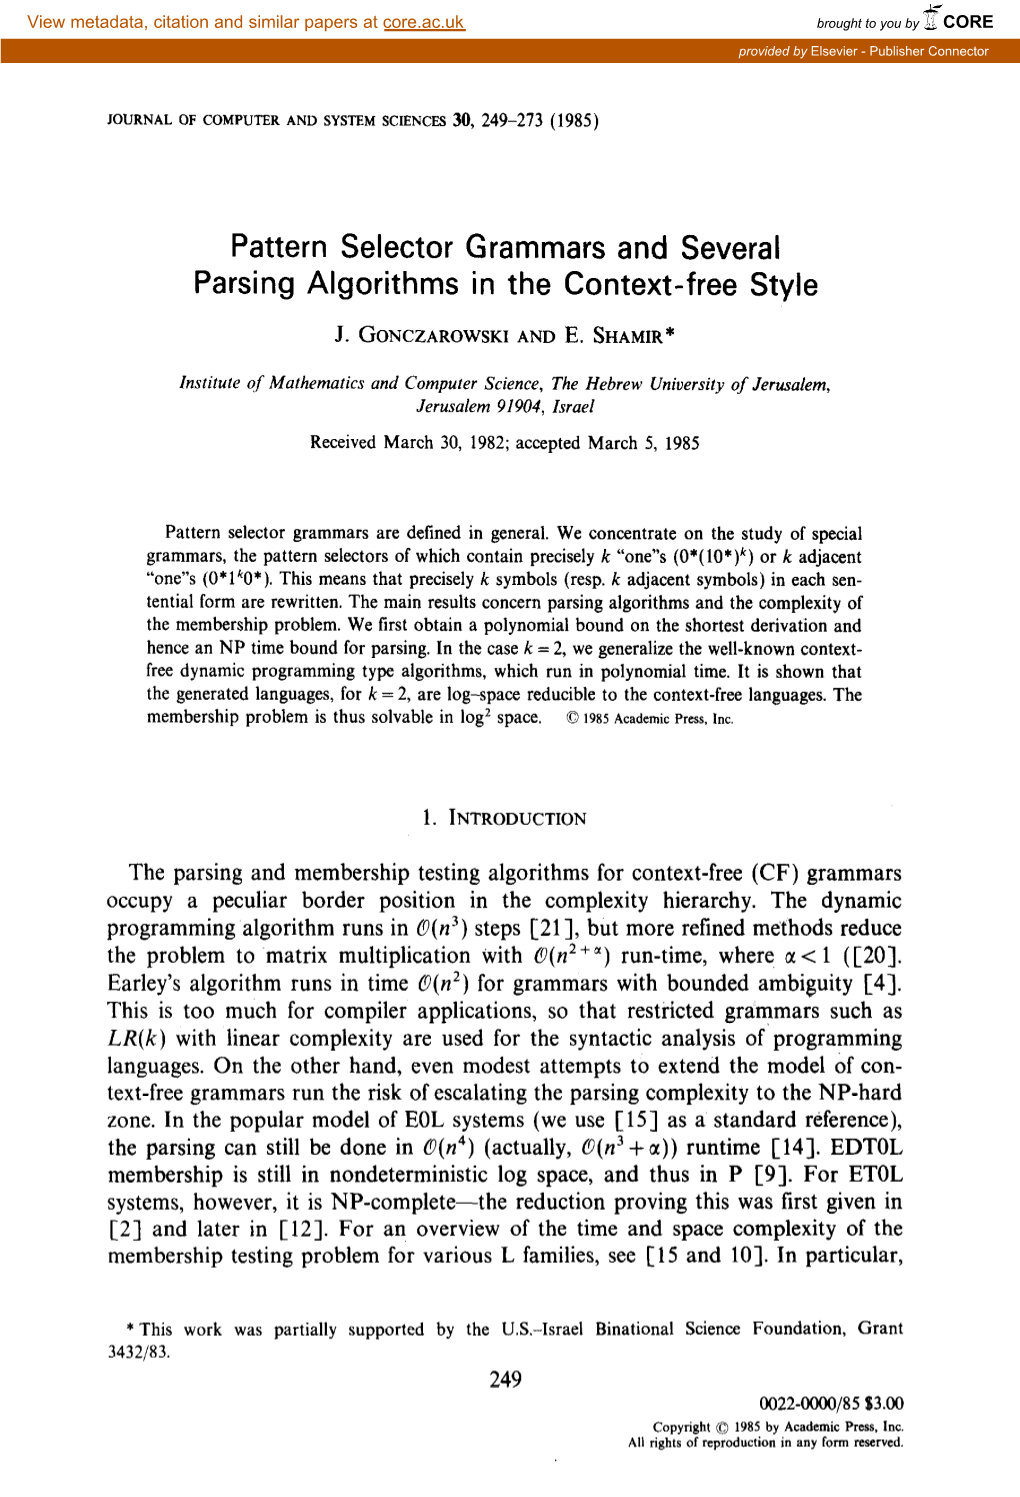 Pattern Selector Grammars and Several Parsing Algorithms in the Context-Free Style